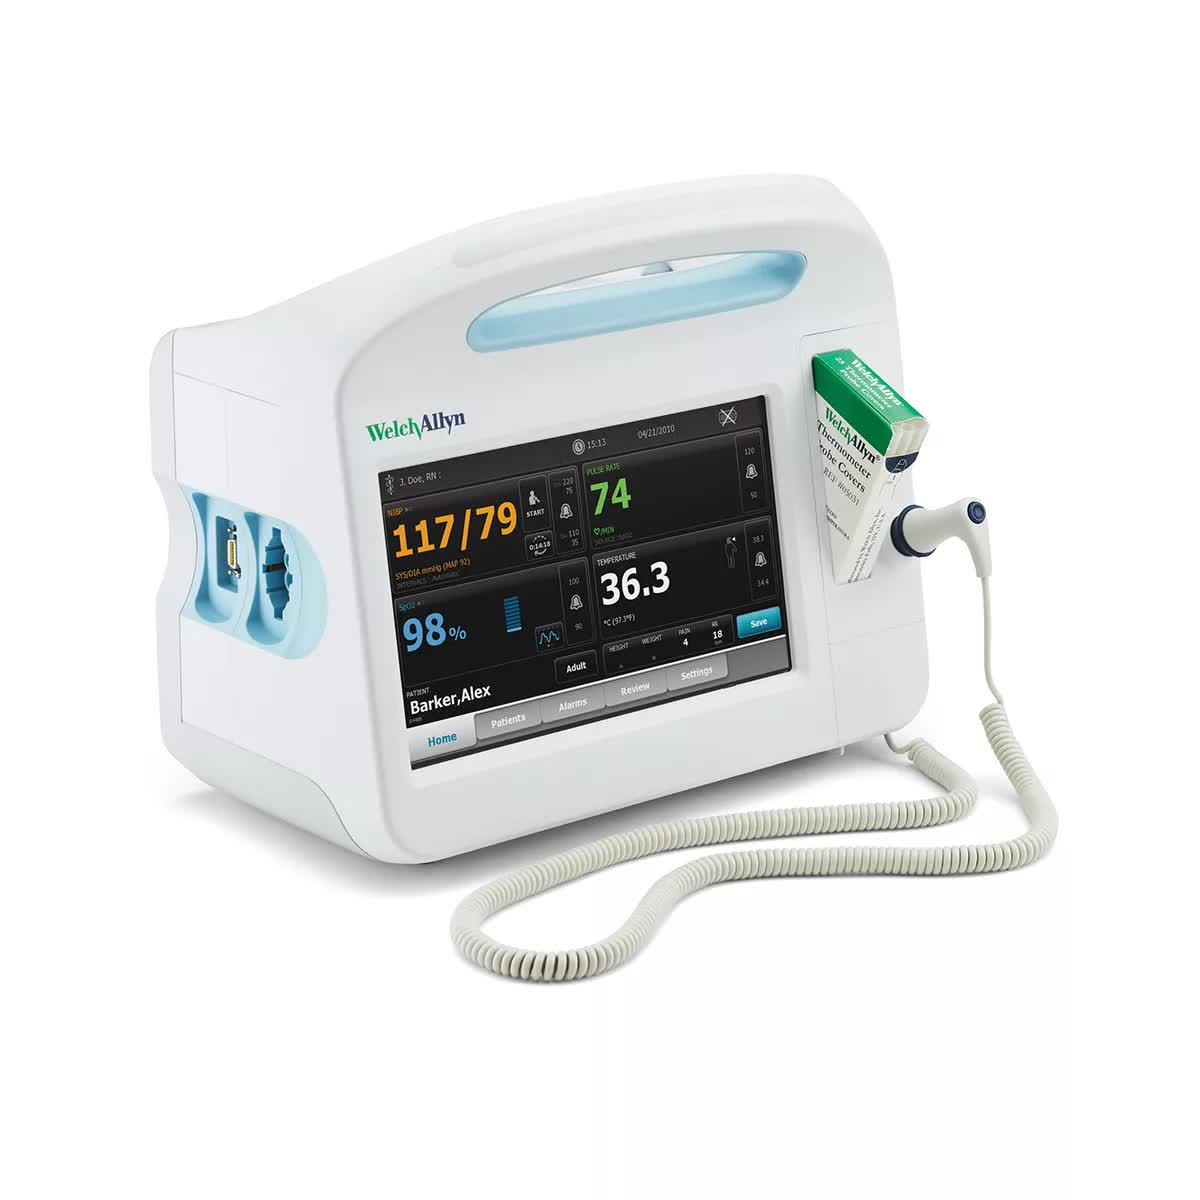 Welch Allyn Connex 6700 Series Vital Signs Monitor with Masimo SpO2, etCO2 and SureTemp Plus